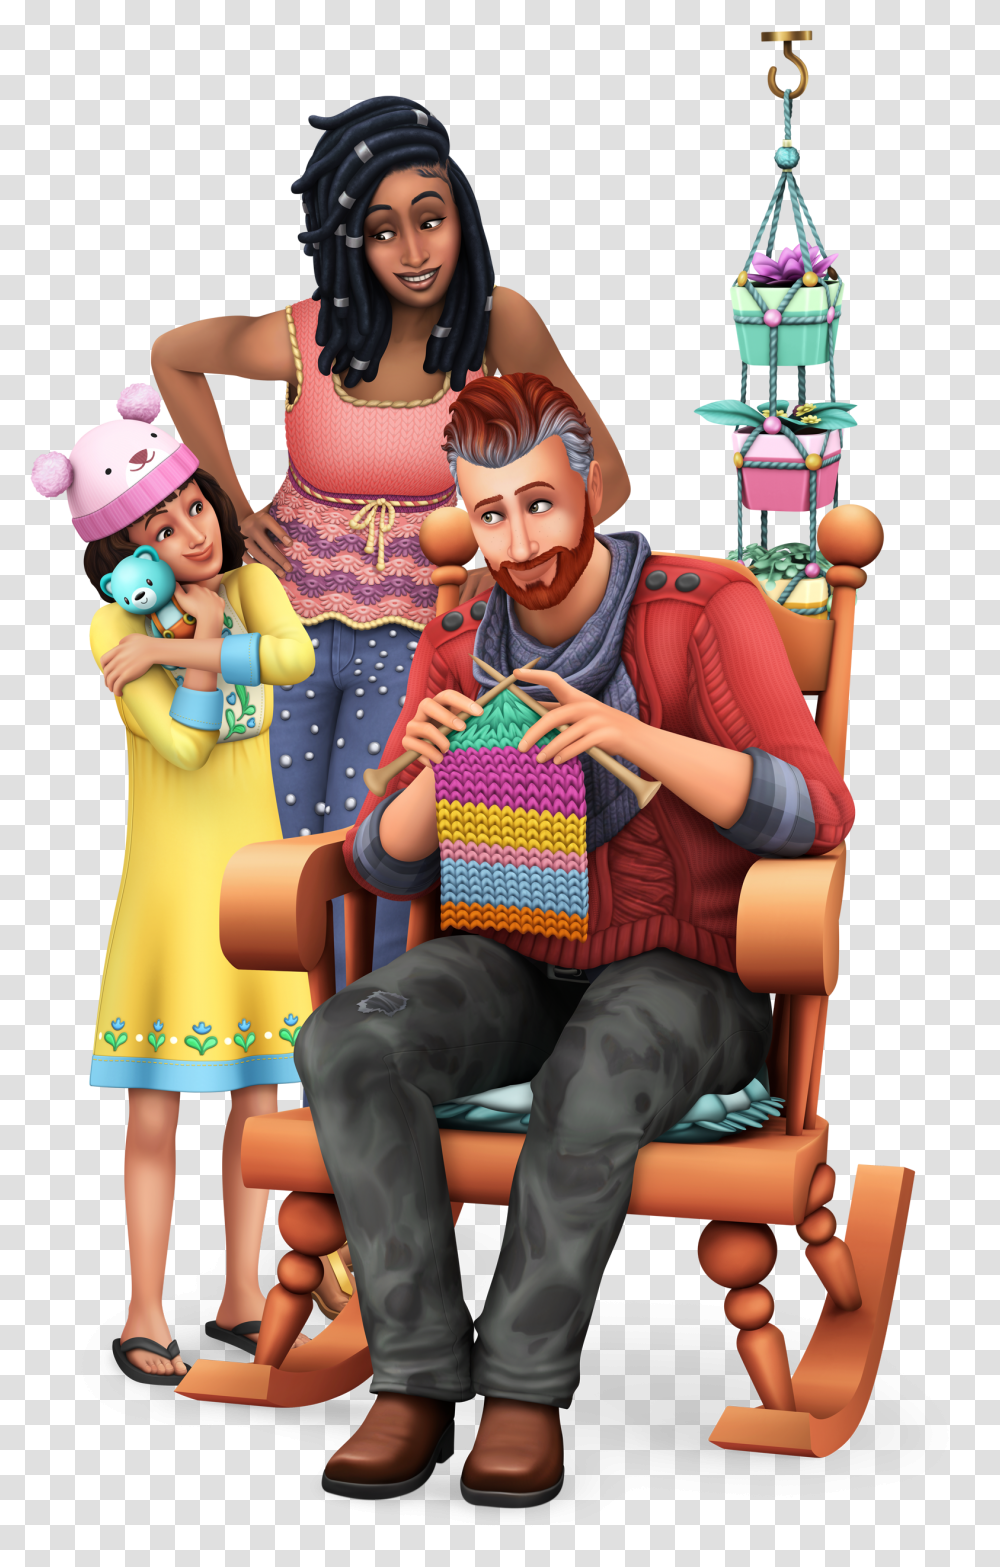 The Sims 4 Nifty Knitting Official Logo Box Art Icon And Sims 4, Person, People, Clothing, Chair Transparent Png